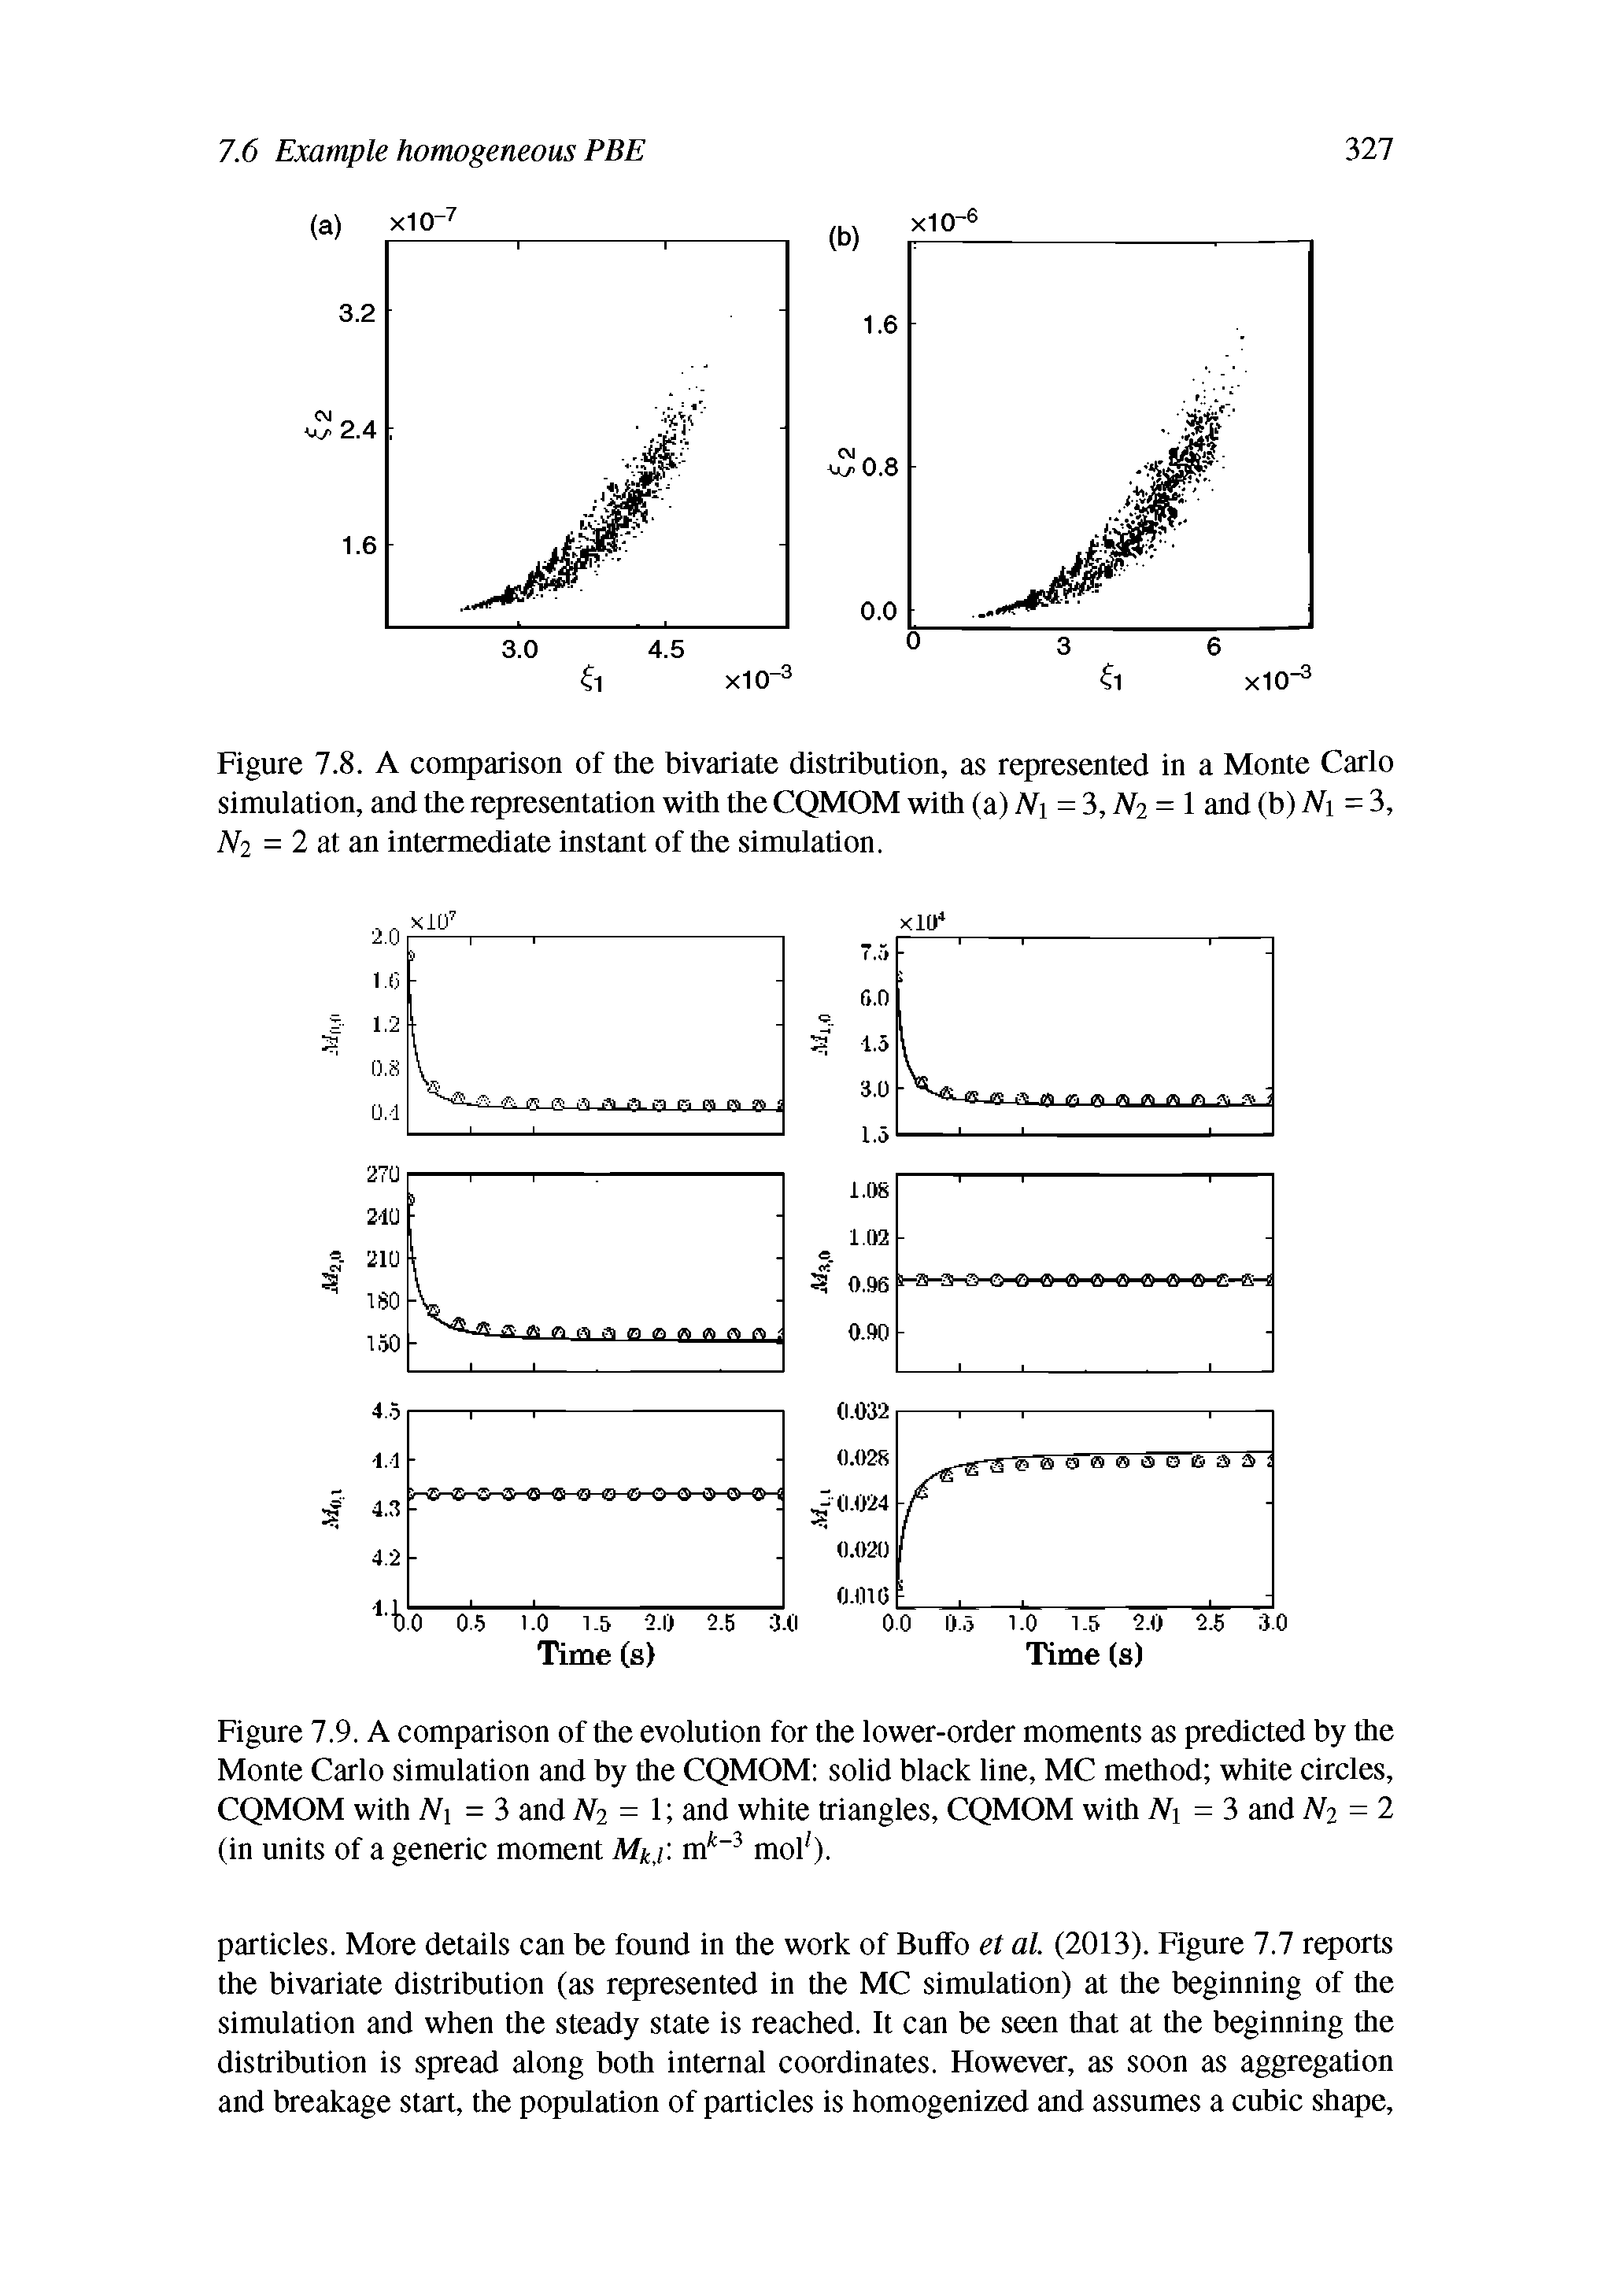 Figure 7.8. A comparison of the bivariate distribution, as represented in a Monte Carlo simulation, and the representation with the CQMOM with (a) Ai = 3, A2 = 1 and (b) N = 3, A2 = 2 at an intermediate instant of the simulation.